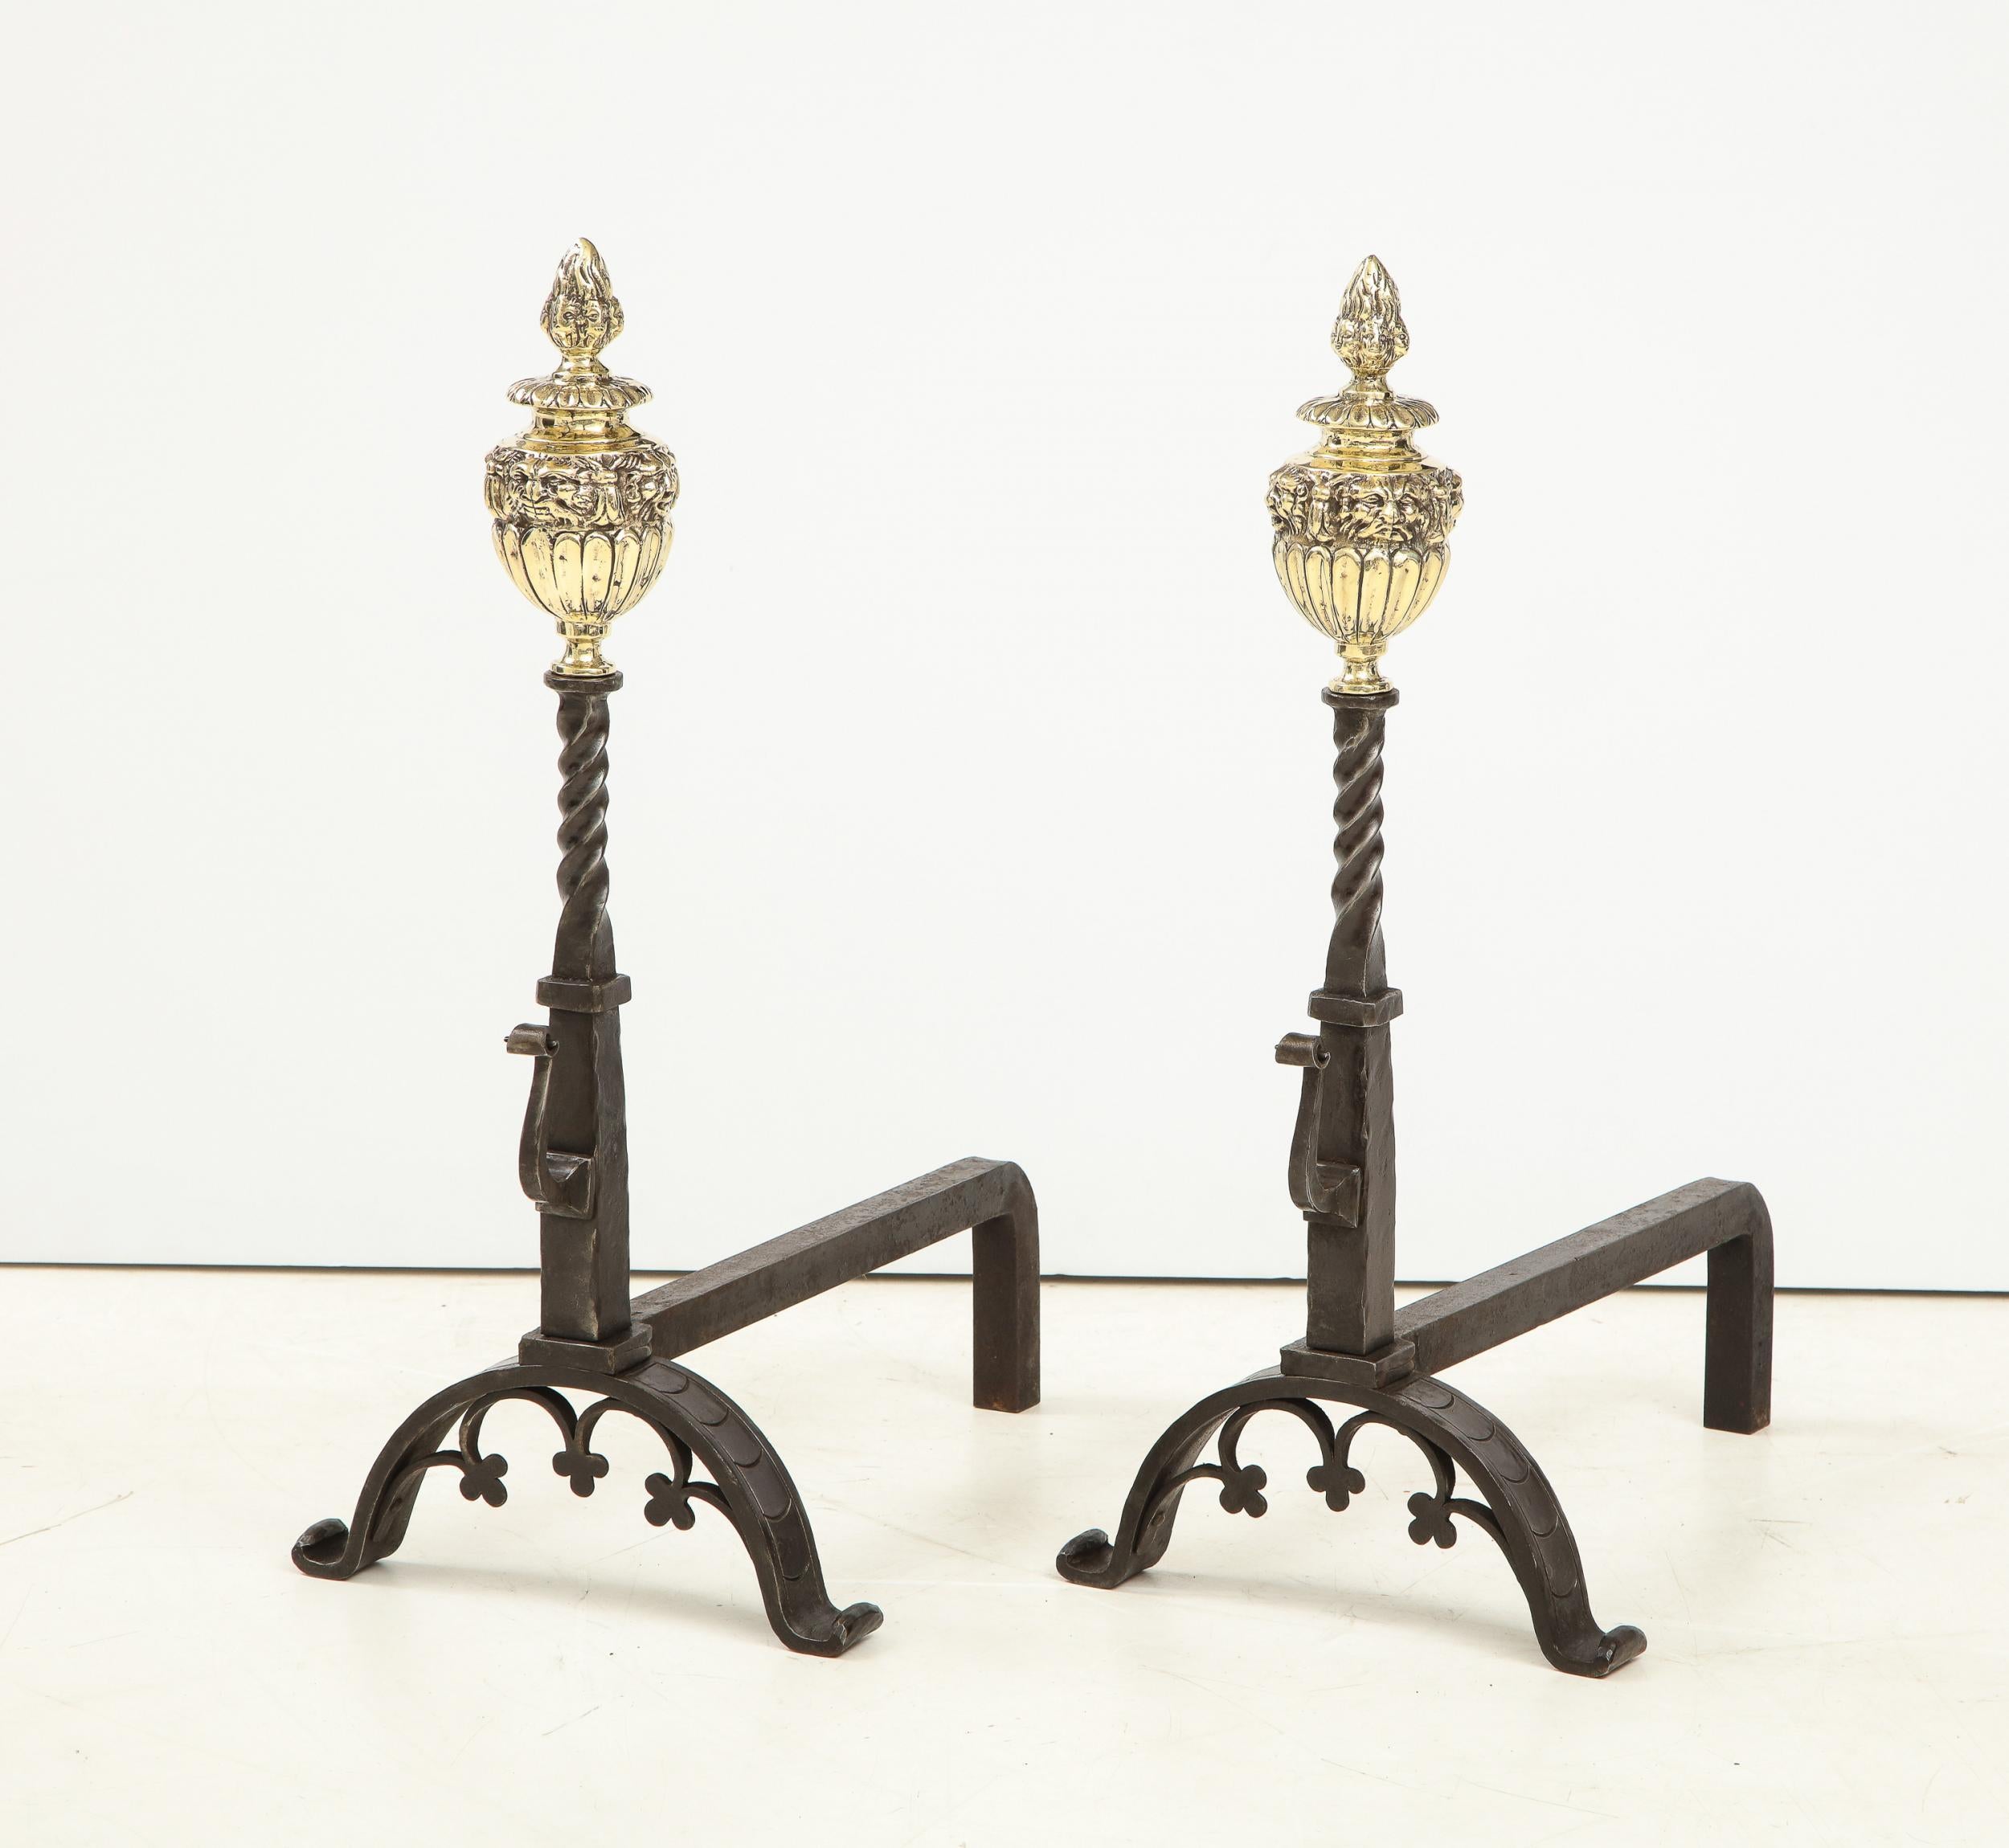 Good pair of Arts & Crafts period andirons in the baroque taste, having flame finials with lion mask decorated urns, standing on hammered shafts with etched design, standing on arched legs with trefoil decorated arches.